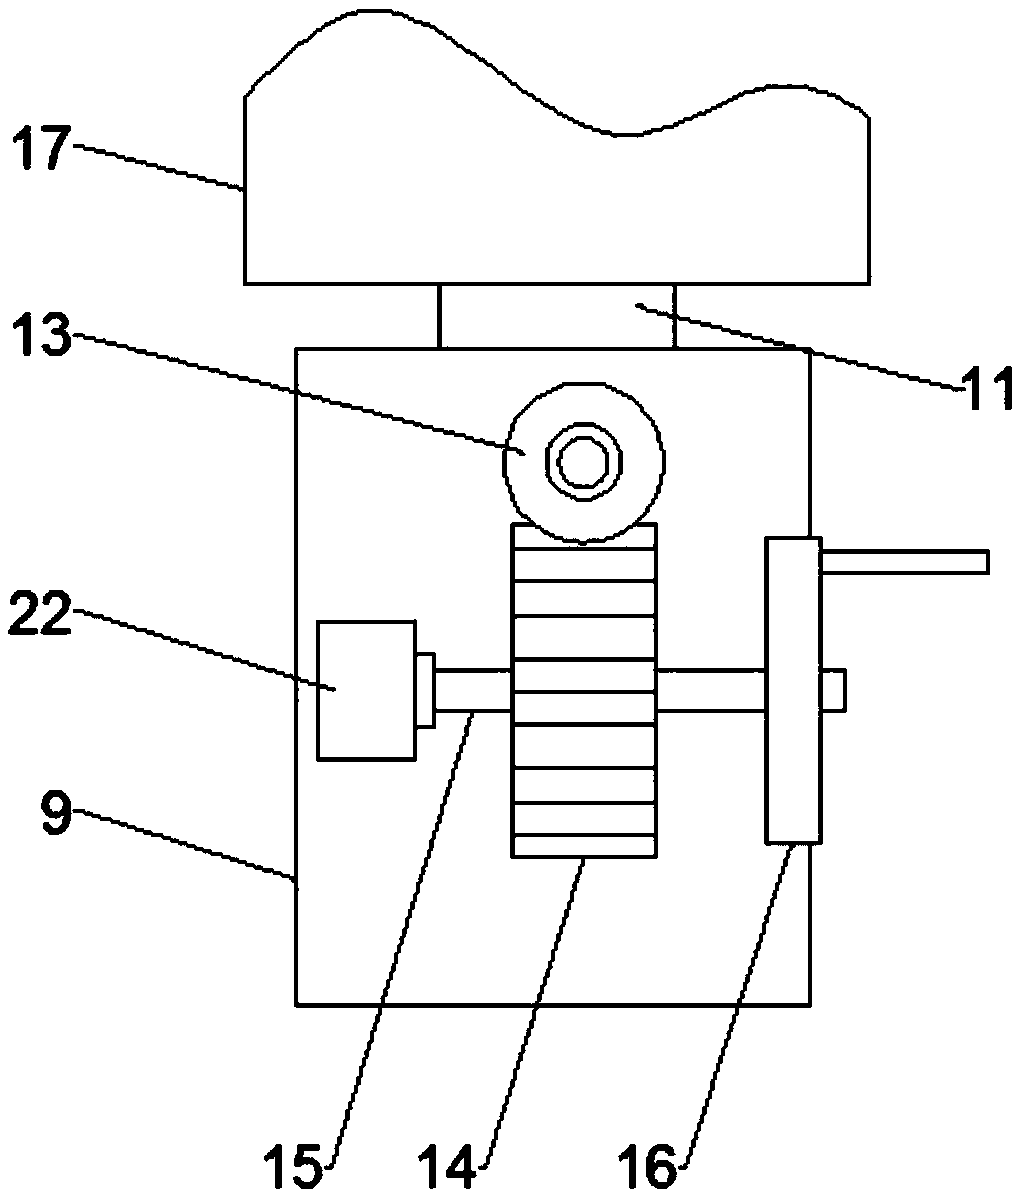 Electrical equipment carrying device for constructional engineering